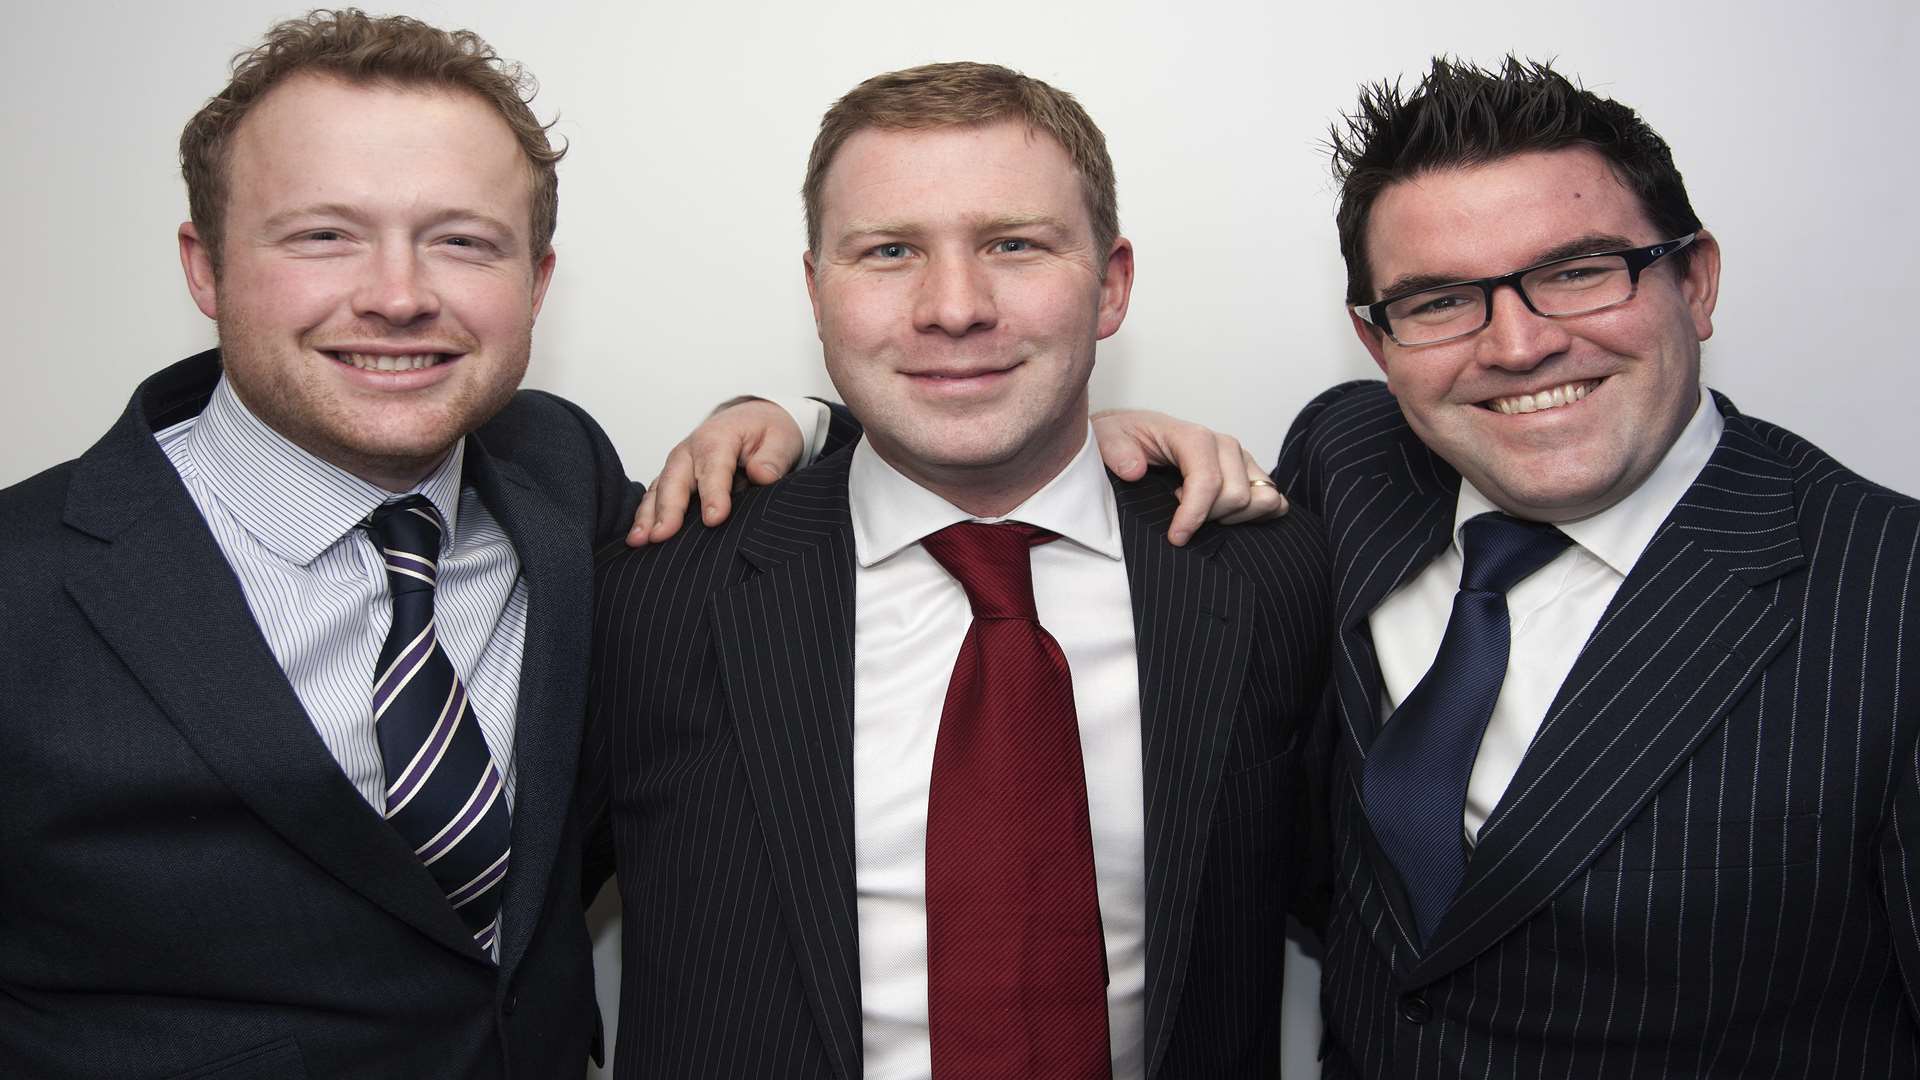 Shore Group founders, from left, Lewis Yorke Johnson, James Hobden and Frank Ashbee